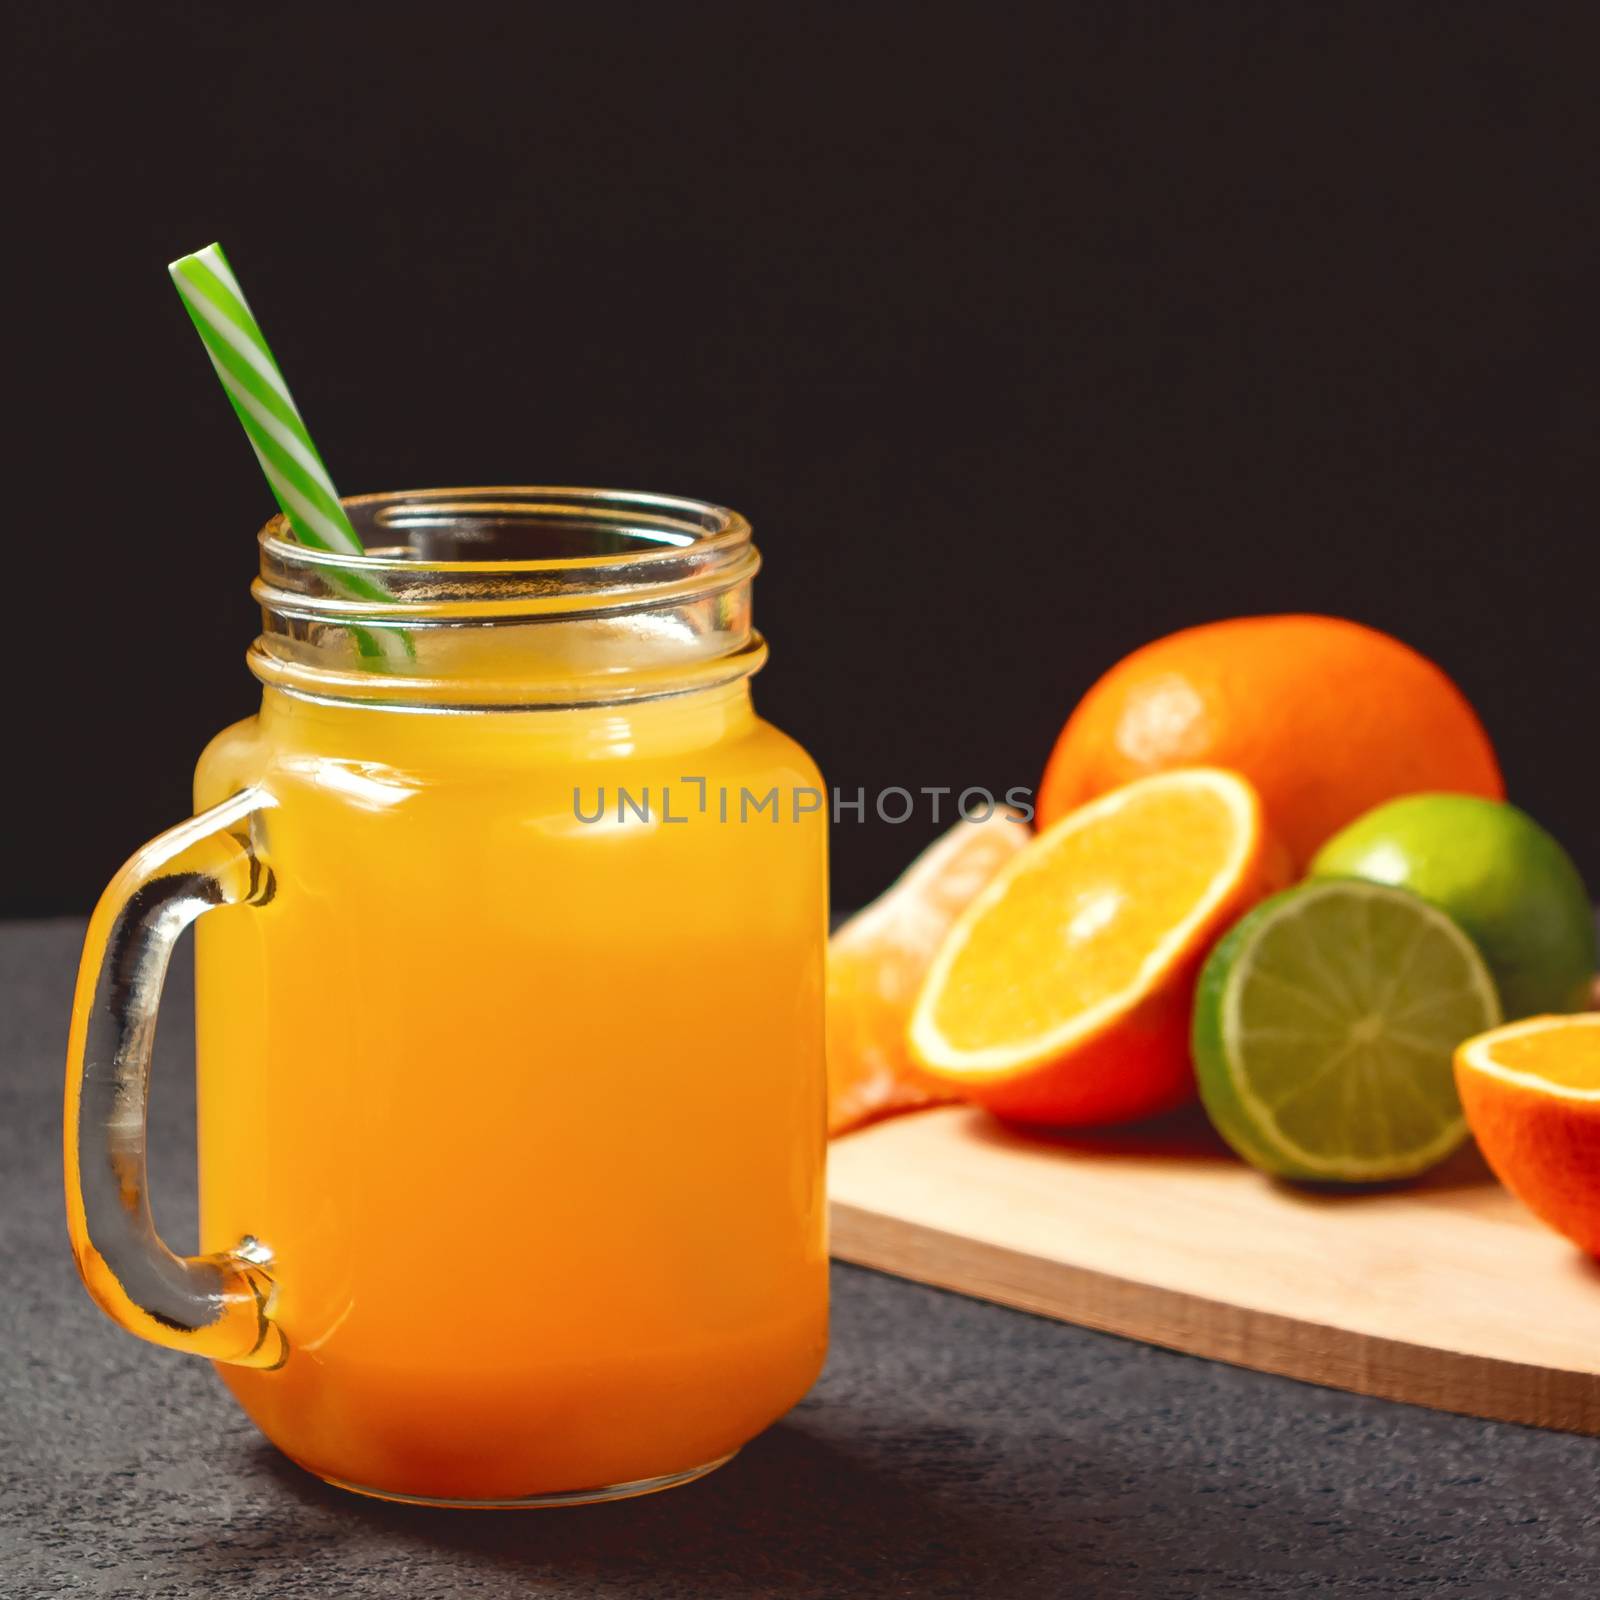 Freshly made citrus juice from oranges, grapefruit and lime in a jar-mug with a straw on black table by galsand